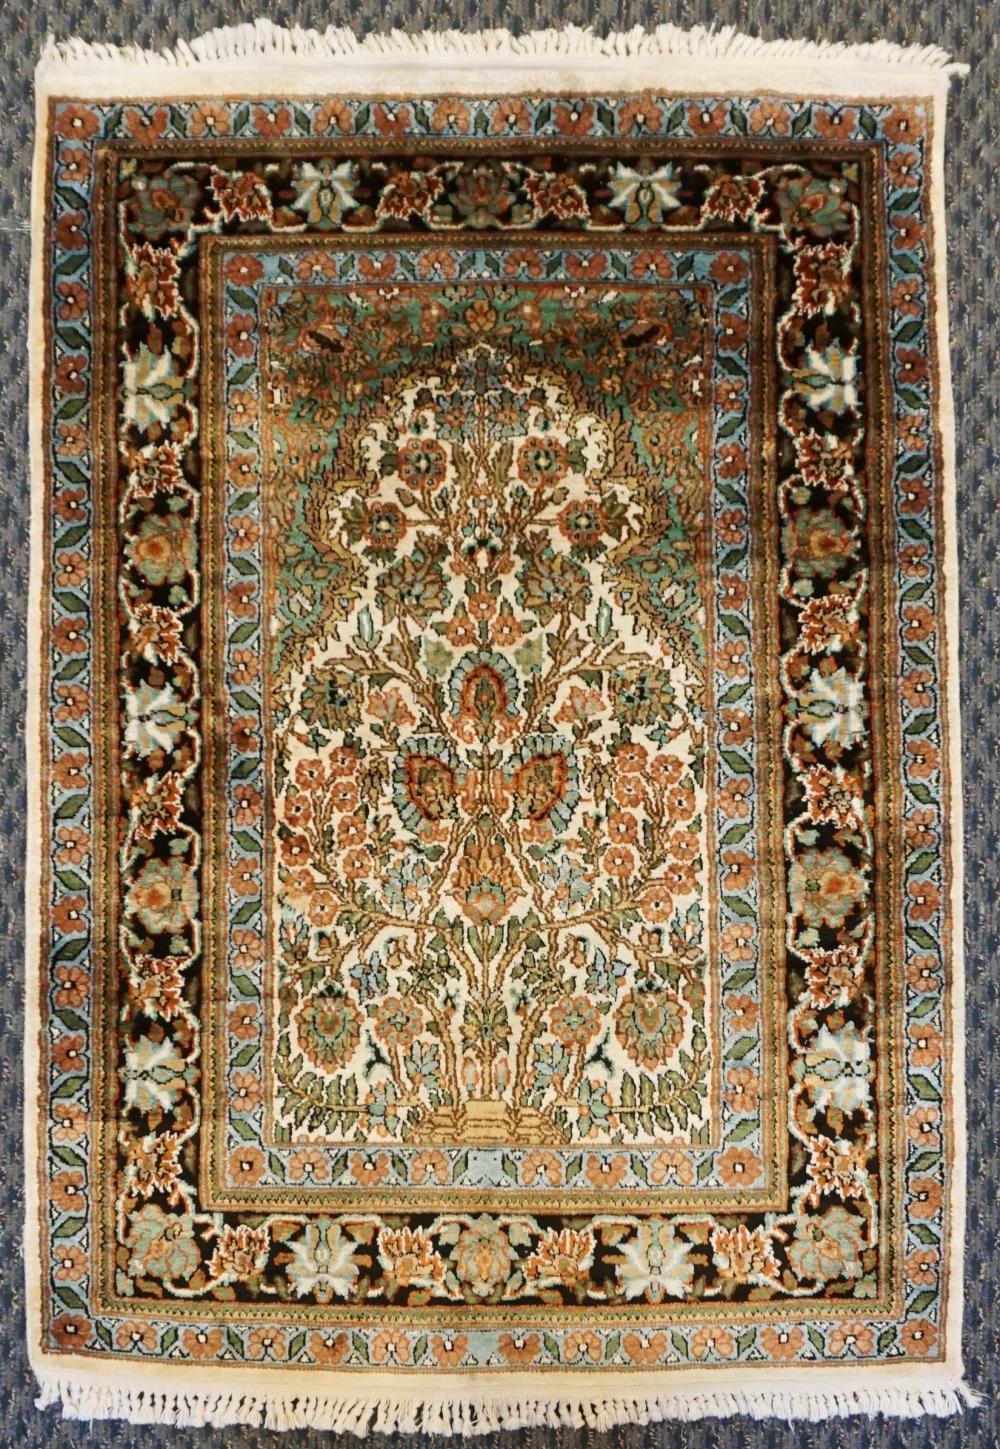 ISFAHAN RUG, 3 FT 10 IN X 2 FT